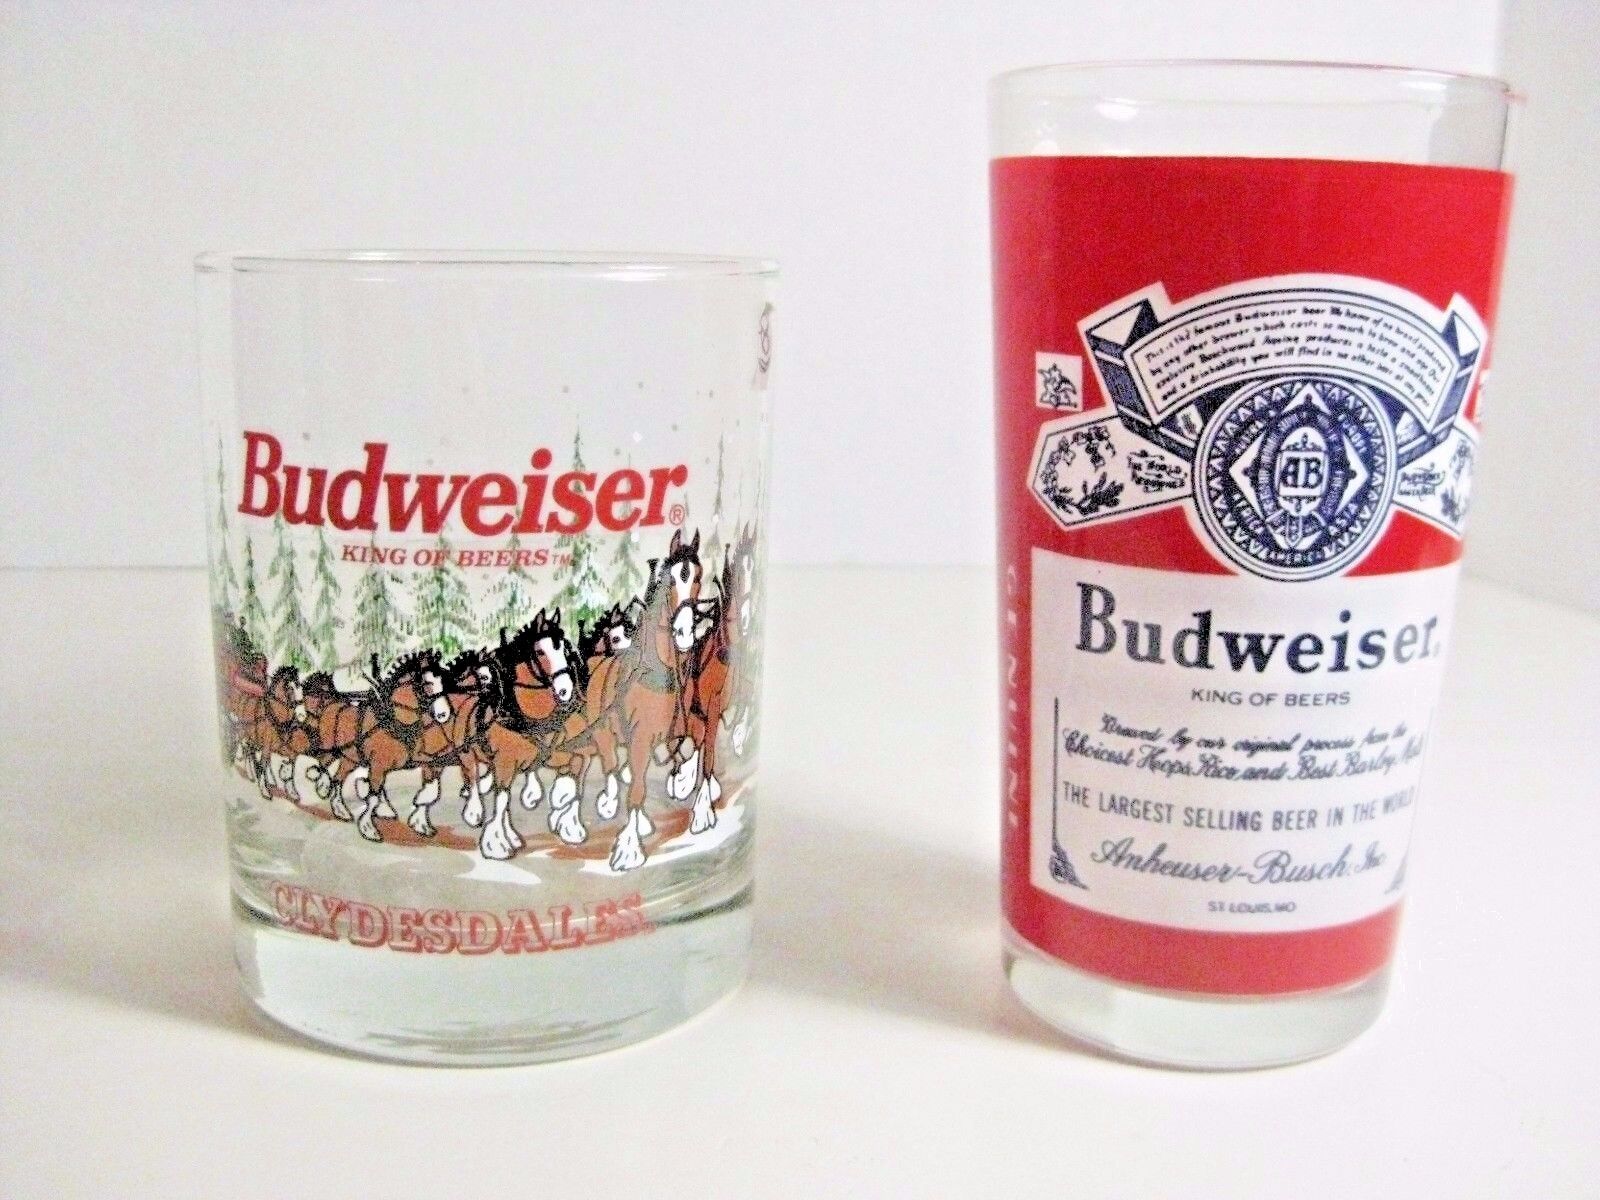  BUDWEISER BEER GLASSES ONE IS 1989 CLYDESDALES  BAR WARE 2 DIFFERENT TYPES Budweiser